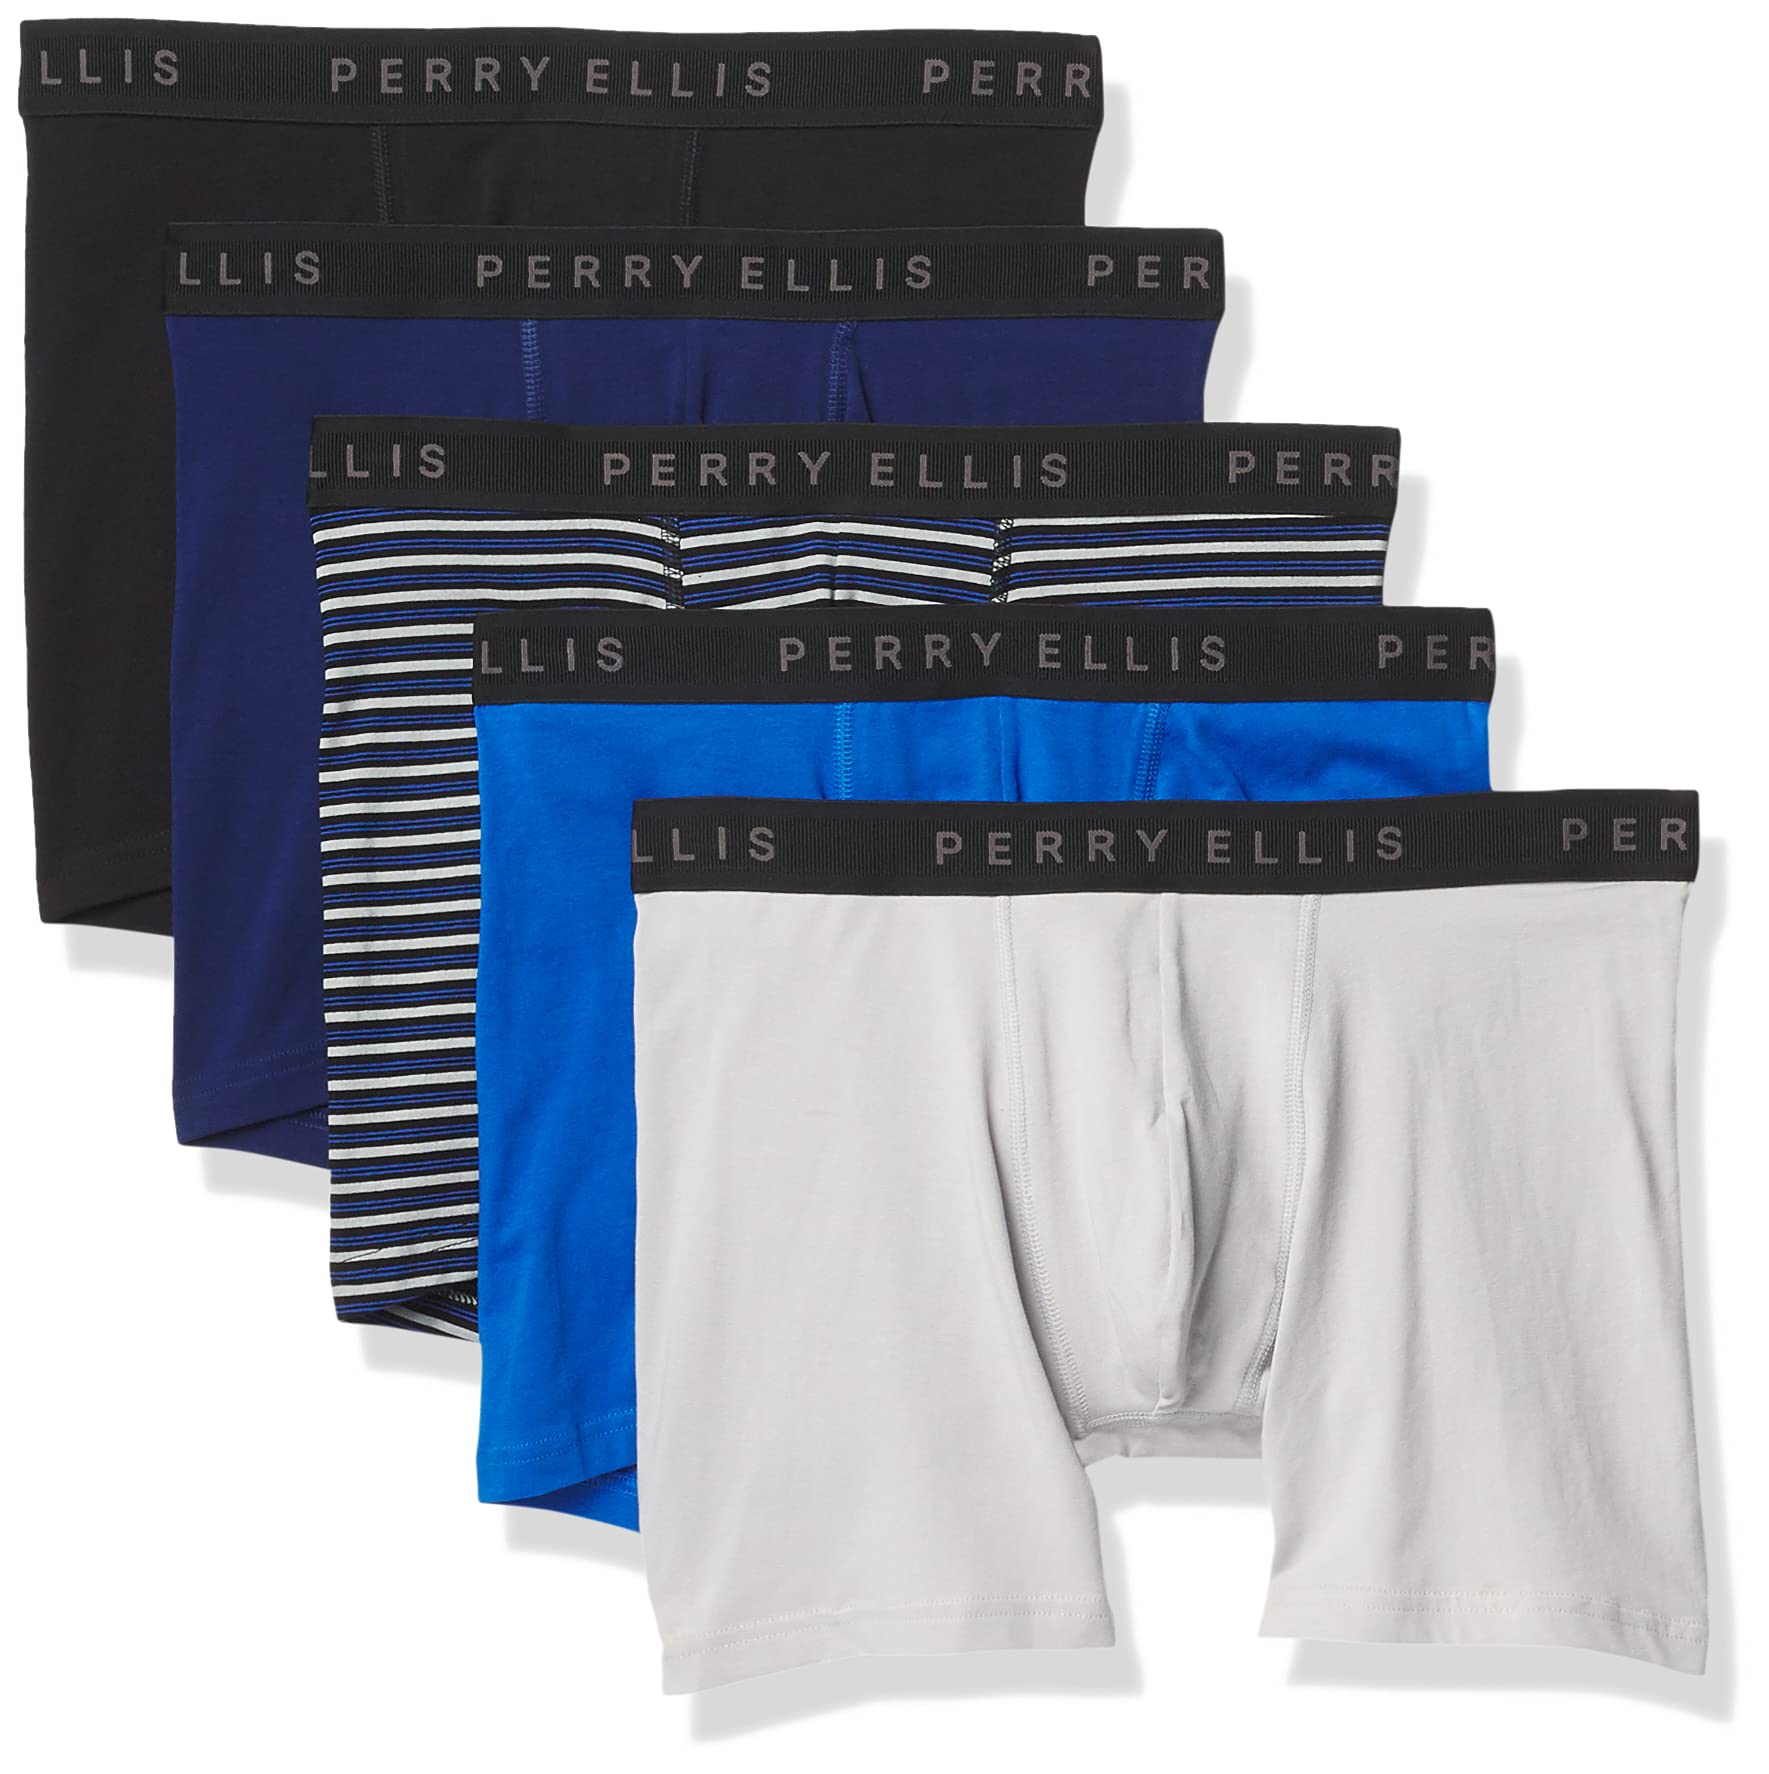 5-Pack Perry Ellis Men's Cotton Stretch TaglessBoxer Briefs (Blue Depths/High Rise/Daphne/Black Rise Stripe/Black, Size: S, M & XL) from $14.65 + Free Shipping w/ Prime or on $35+